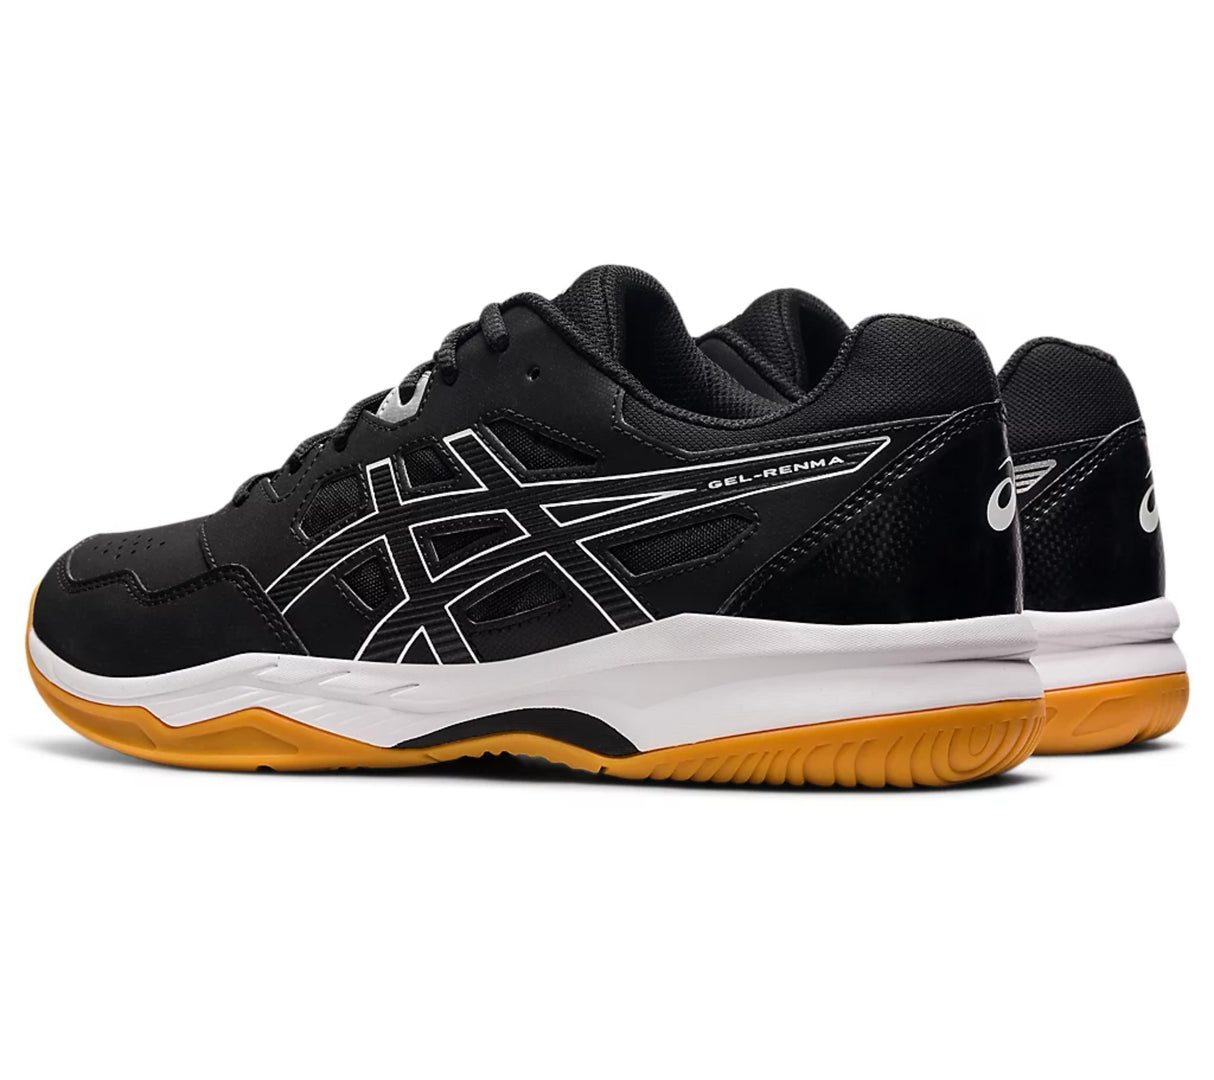 Asics GEL-RENMA Sports Running Shoes Black/White 1071A068